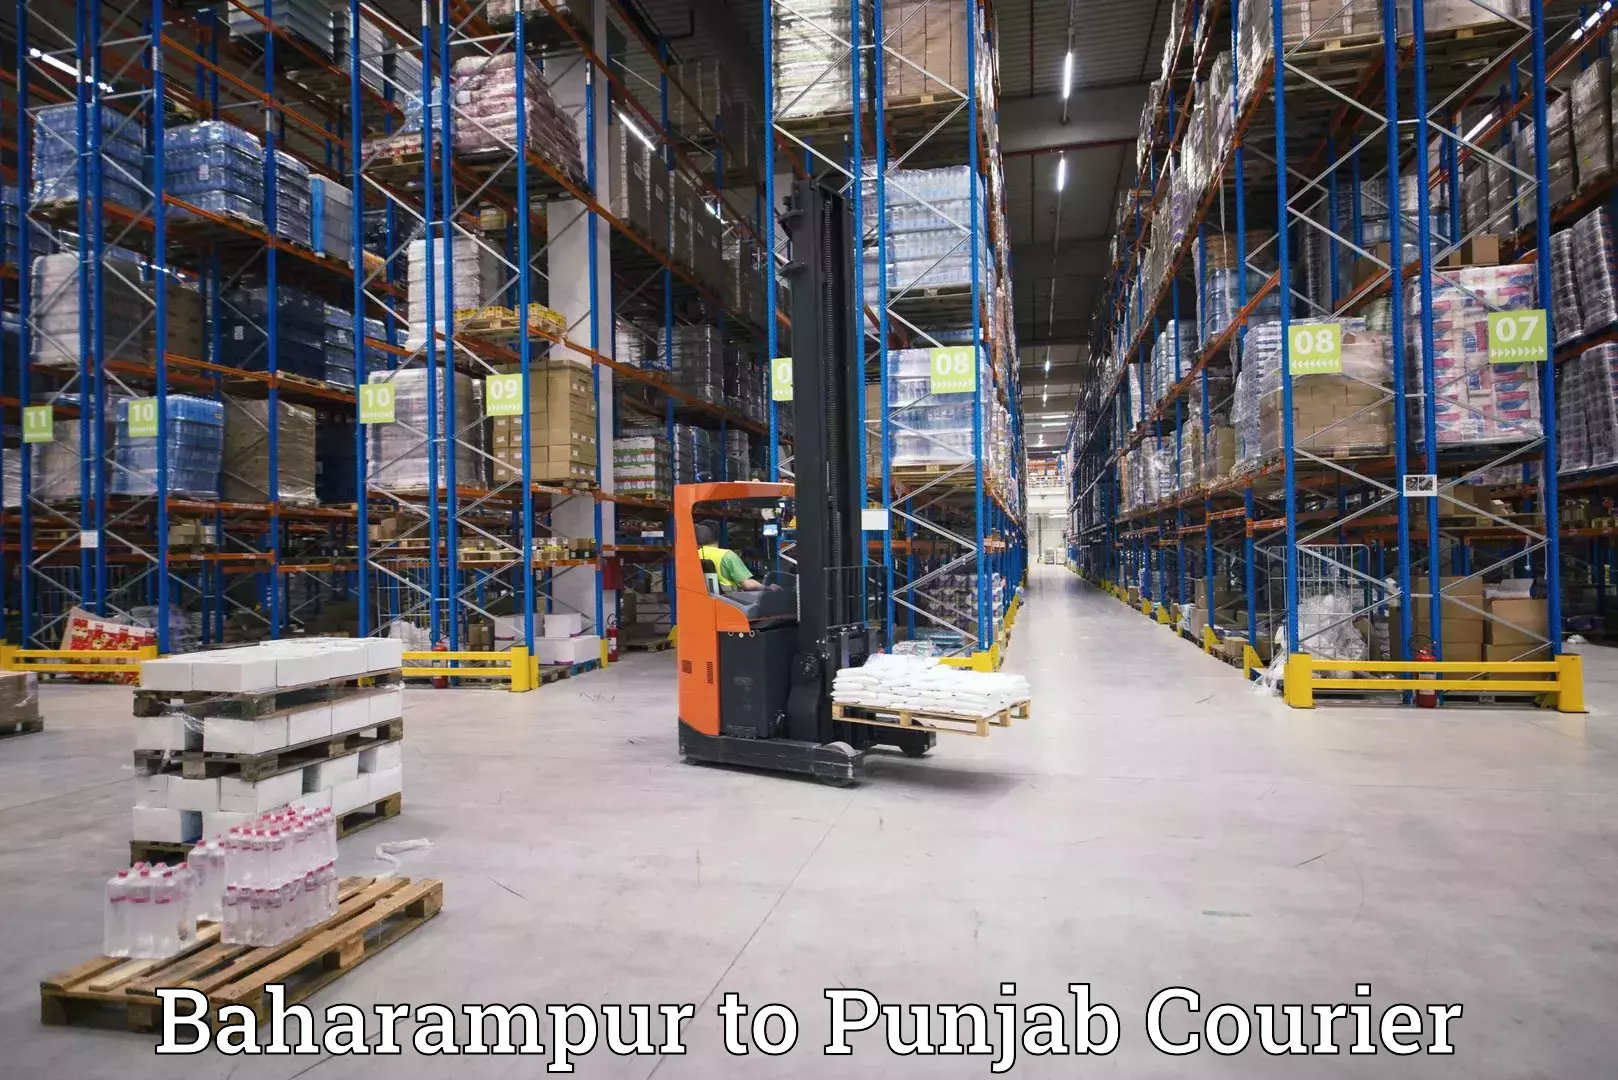 Rural area delivery Baharampur to Nawanshahr